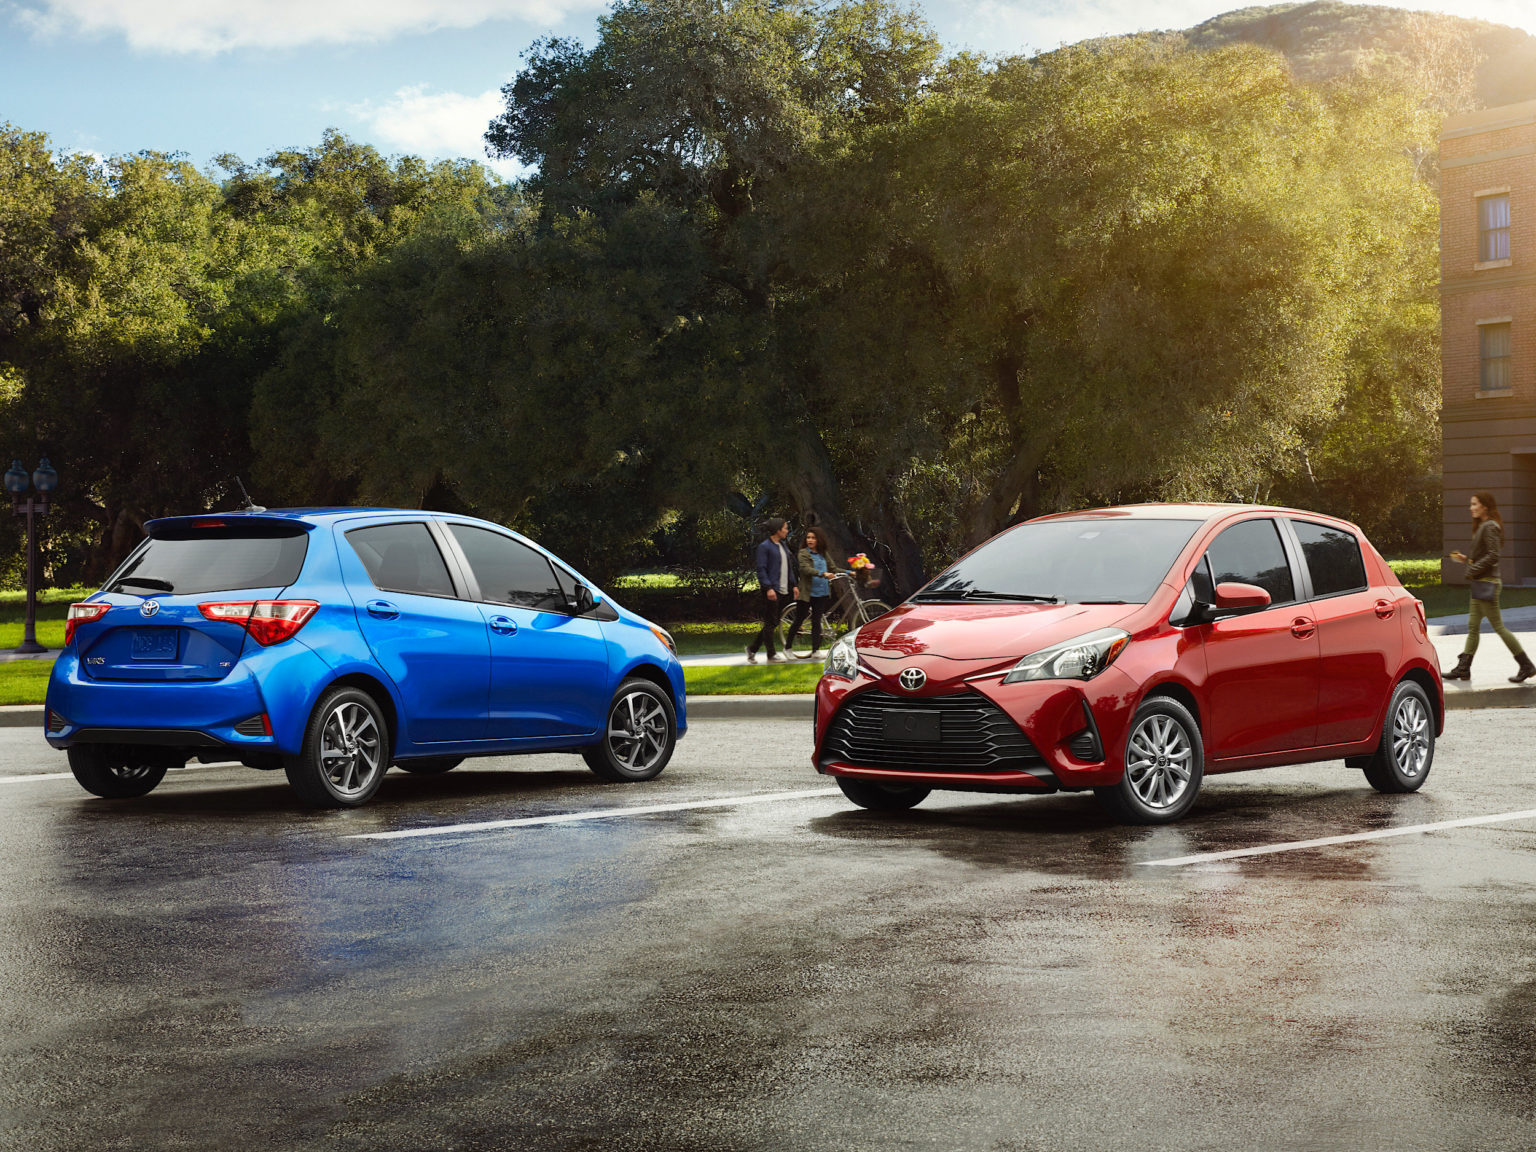 The 2020 Toyota Yaris punches above its weight.